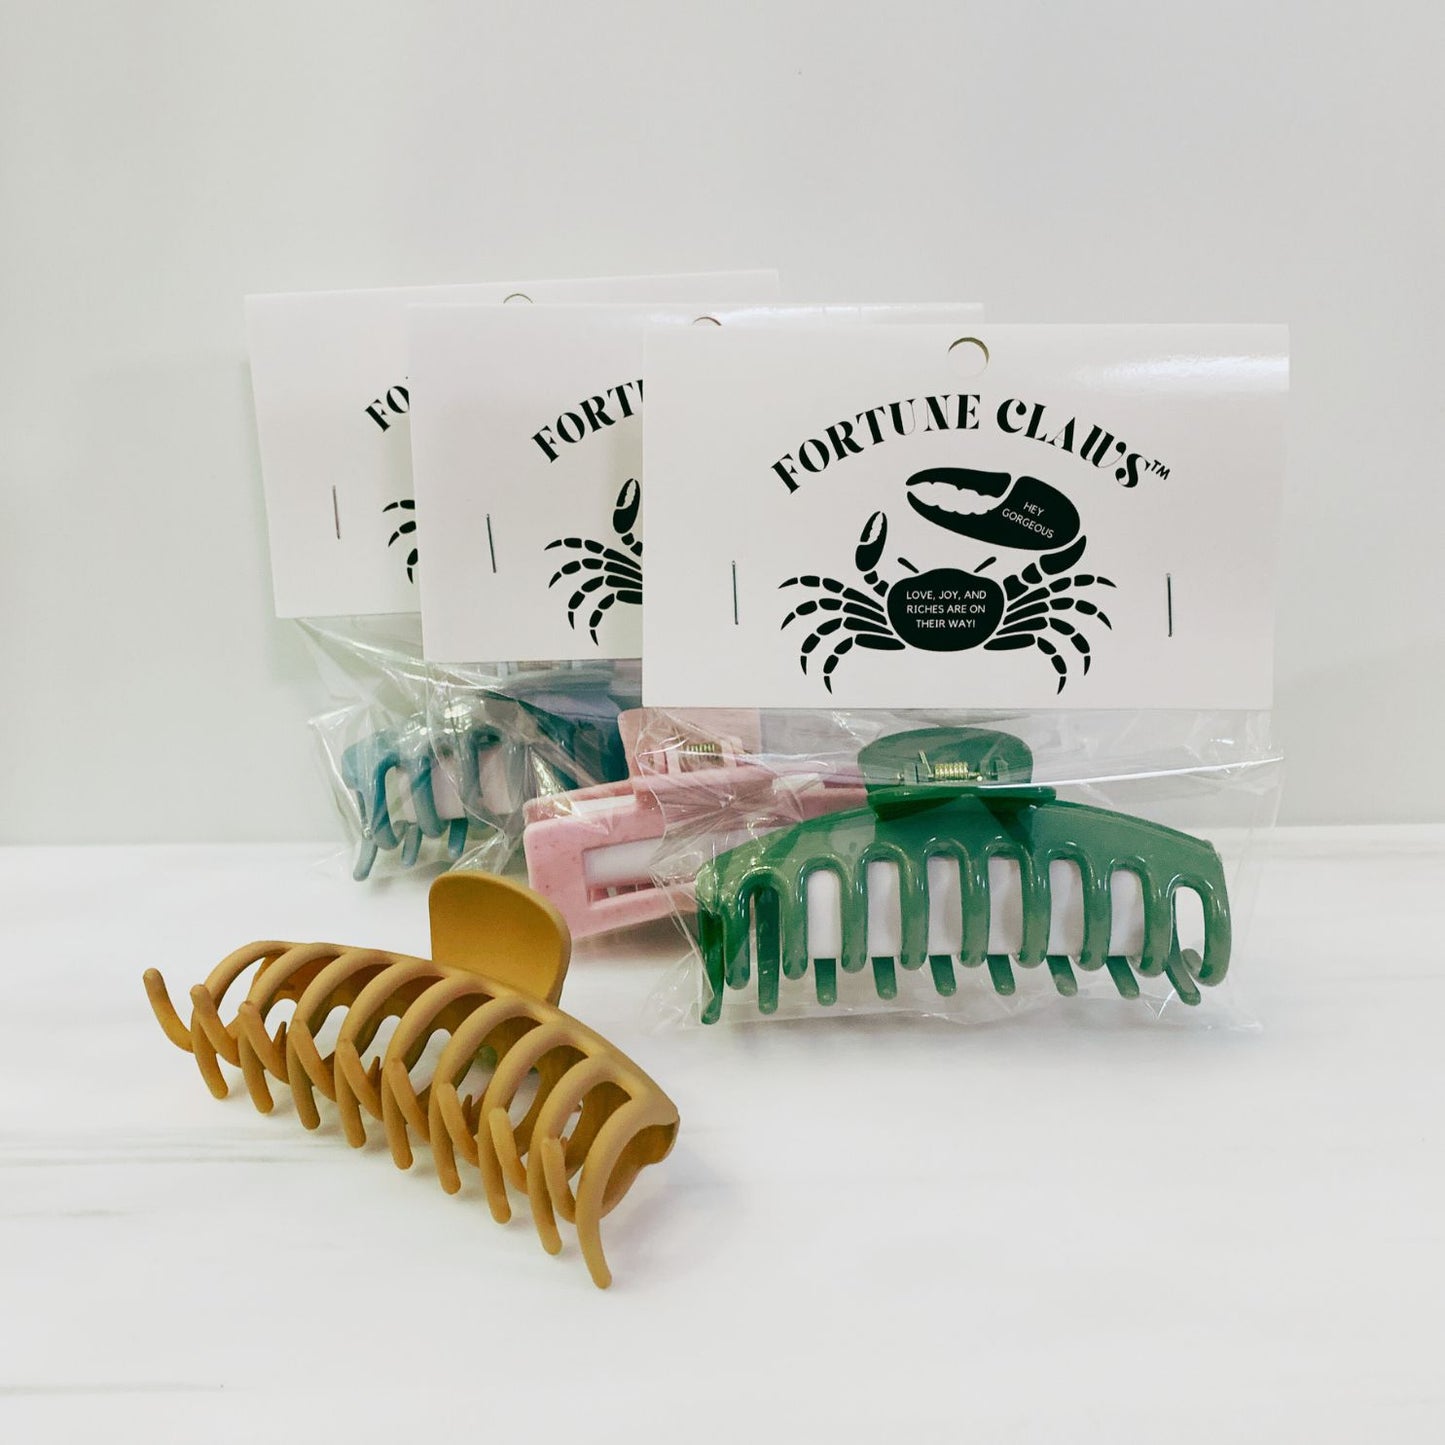 Fortune Claws™ Hair Claws | Unique Fortune Inside | Single or Gift Pack